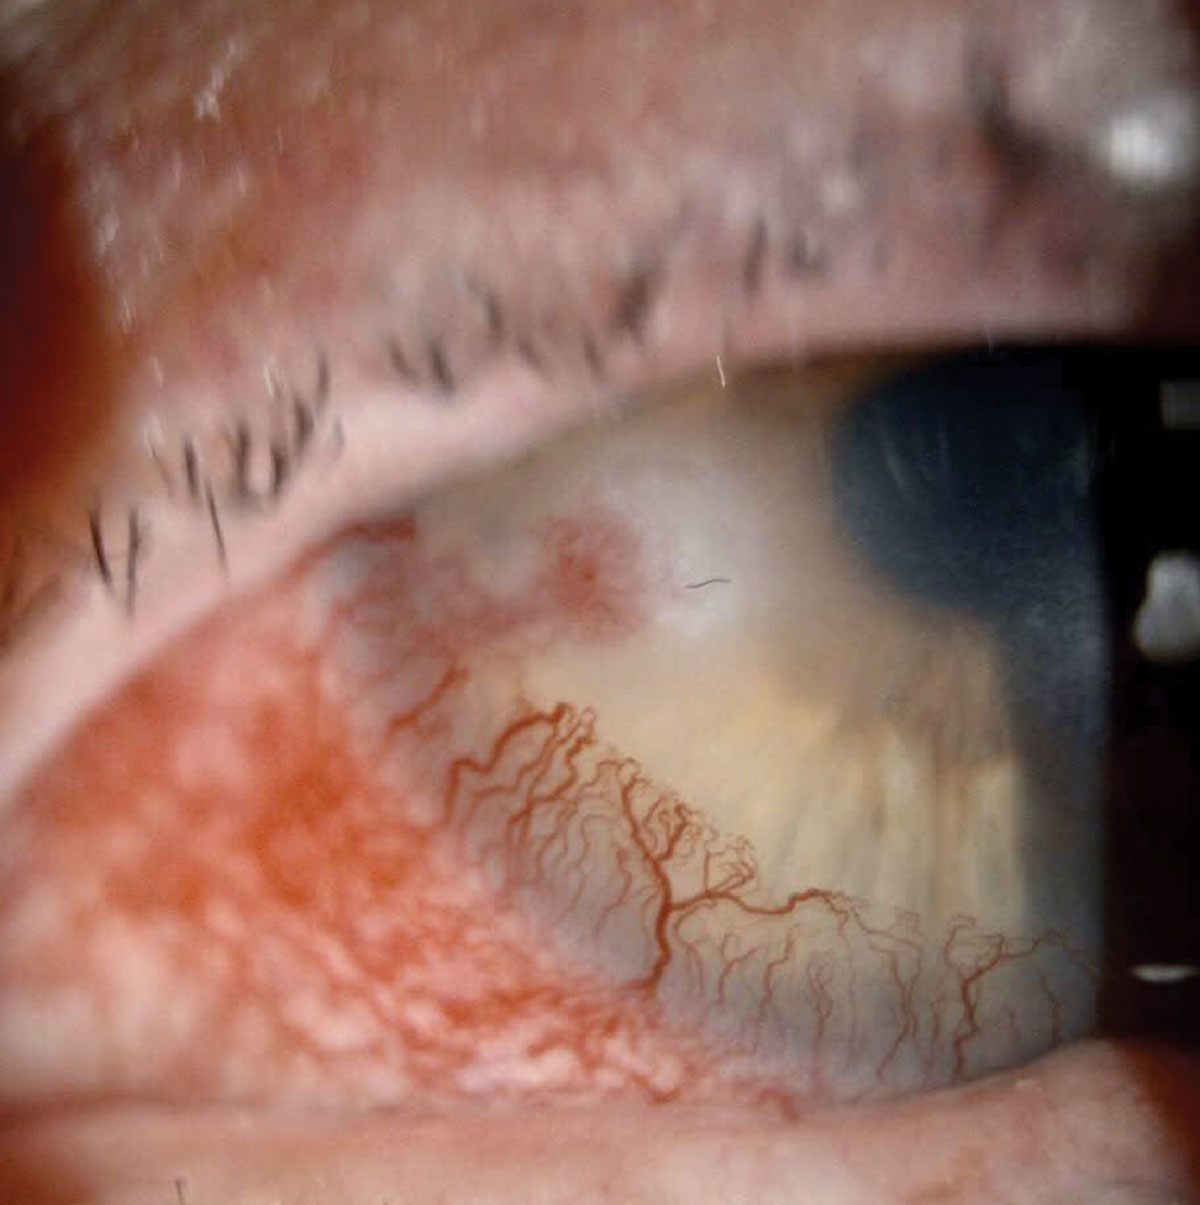 Case 5. Slit lamp exam in this patient showed significant telangiectatic blepharitis, a corneal infiltrate with a leash of superficial neovascularization from the nasal limbus and a smaller-sized epithelial defect overlying the infiltrate.